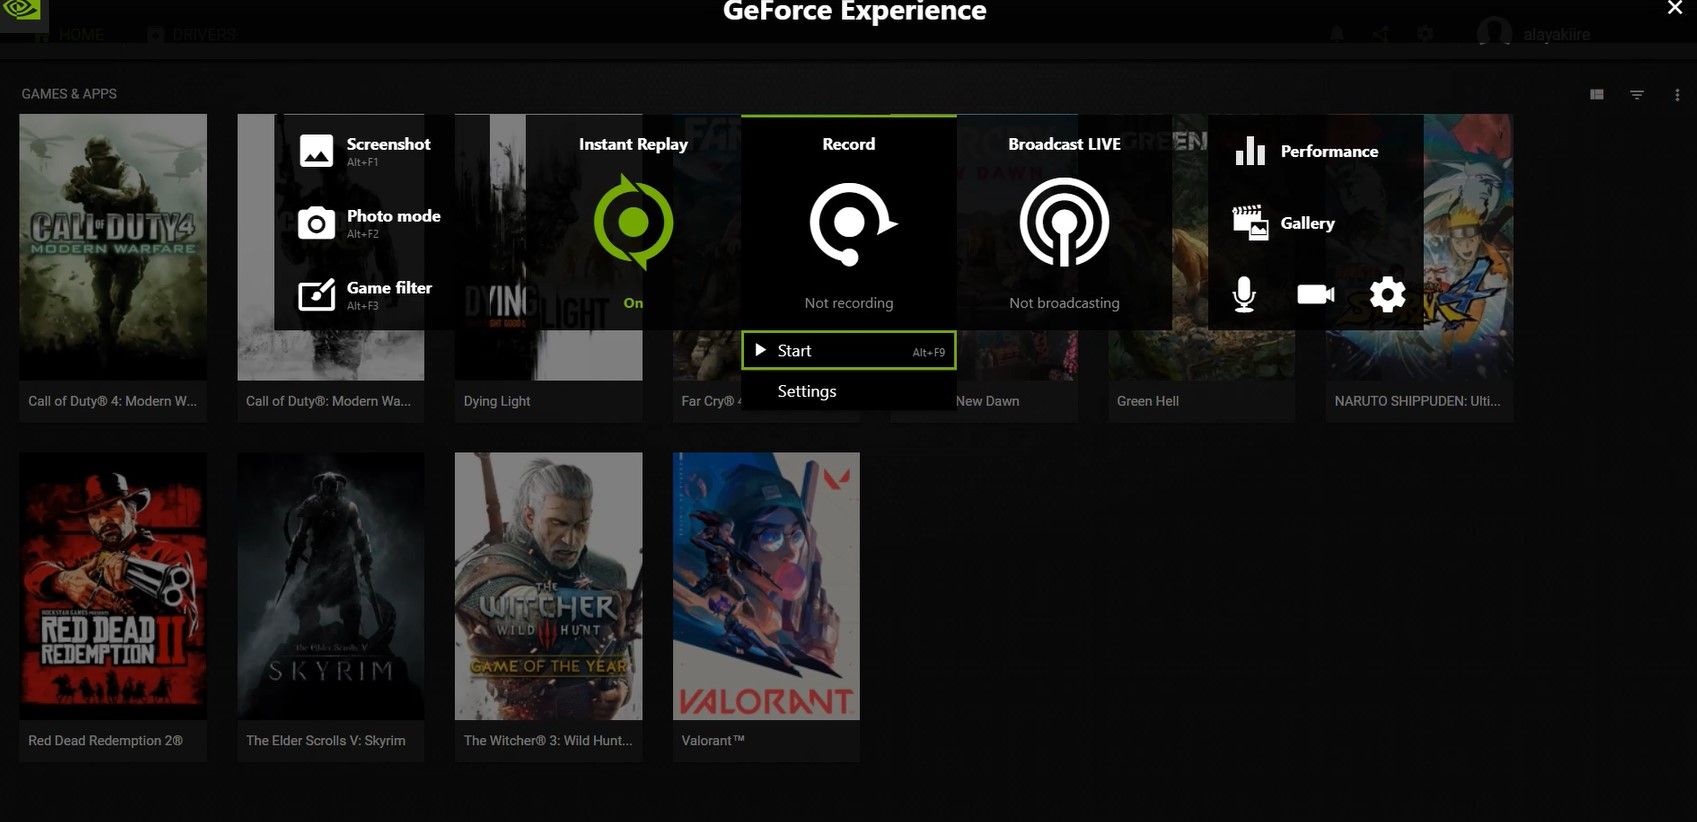 The NVIDIA Geforce Experience Software